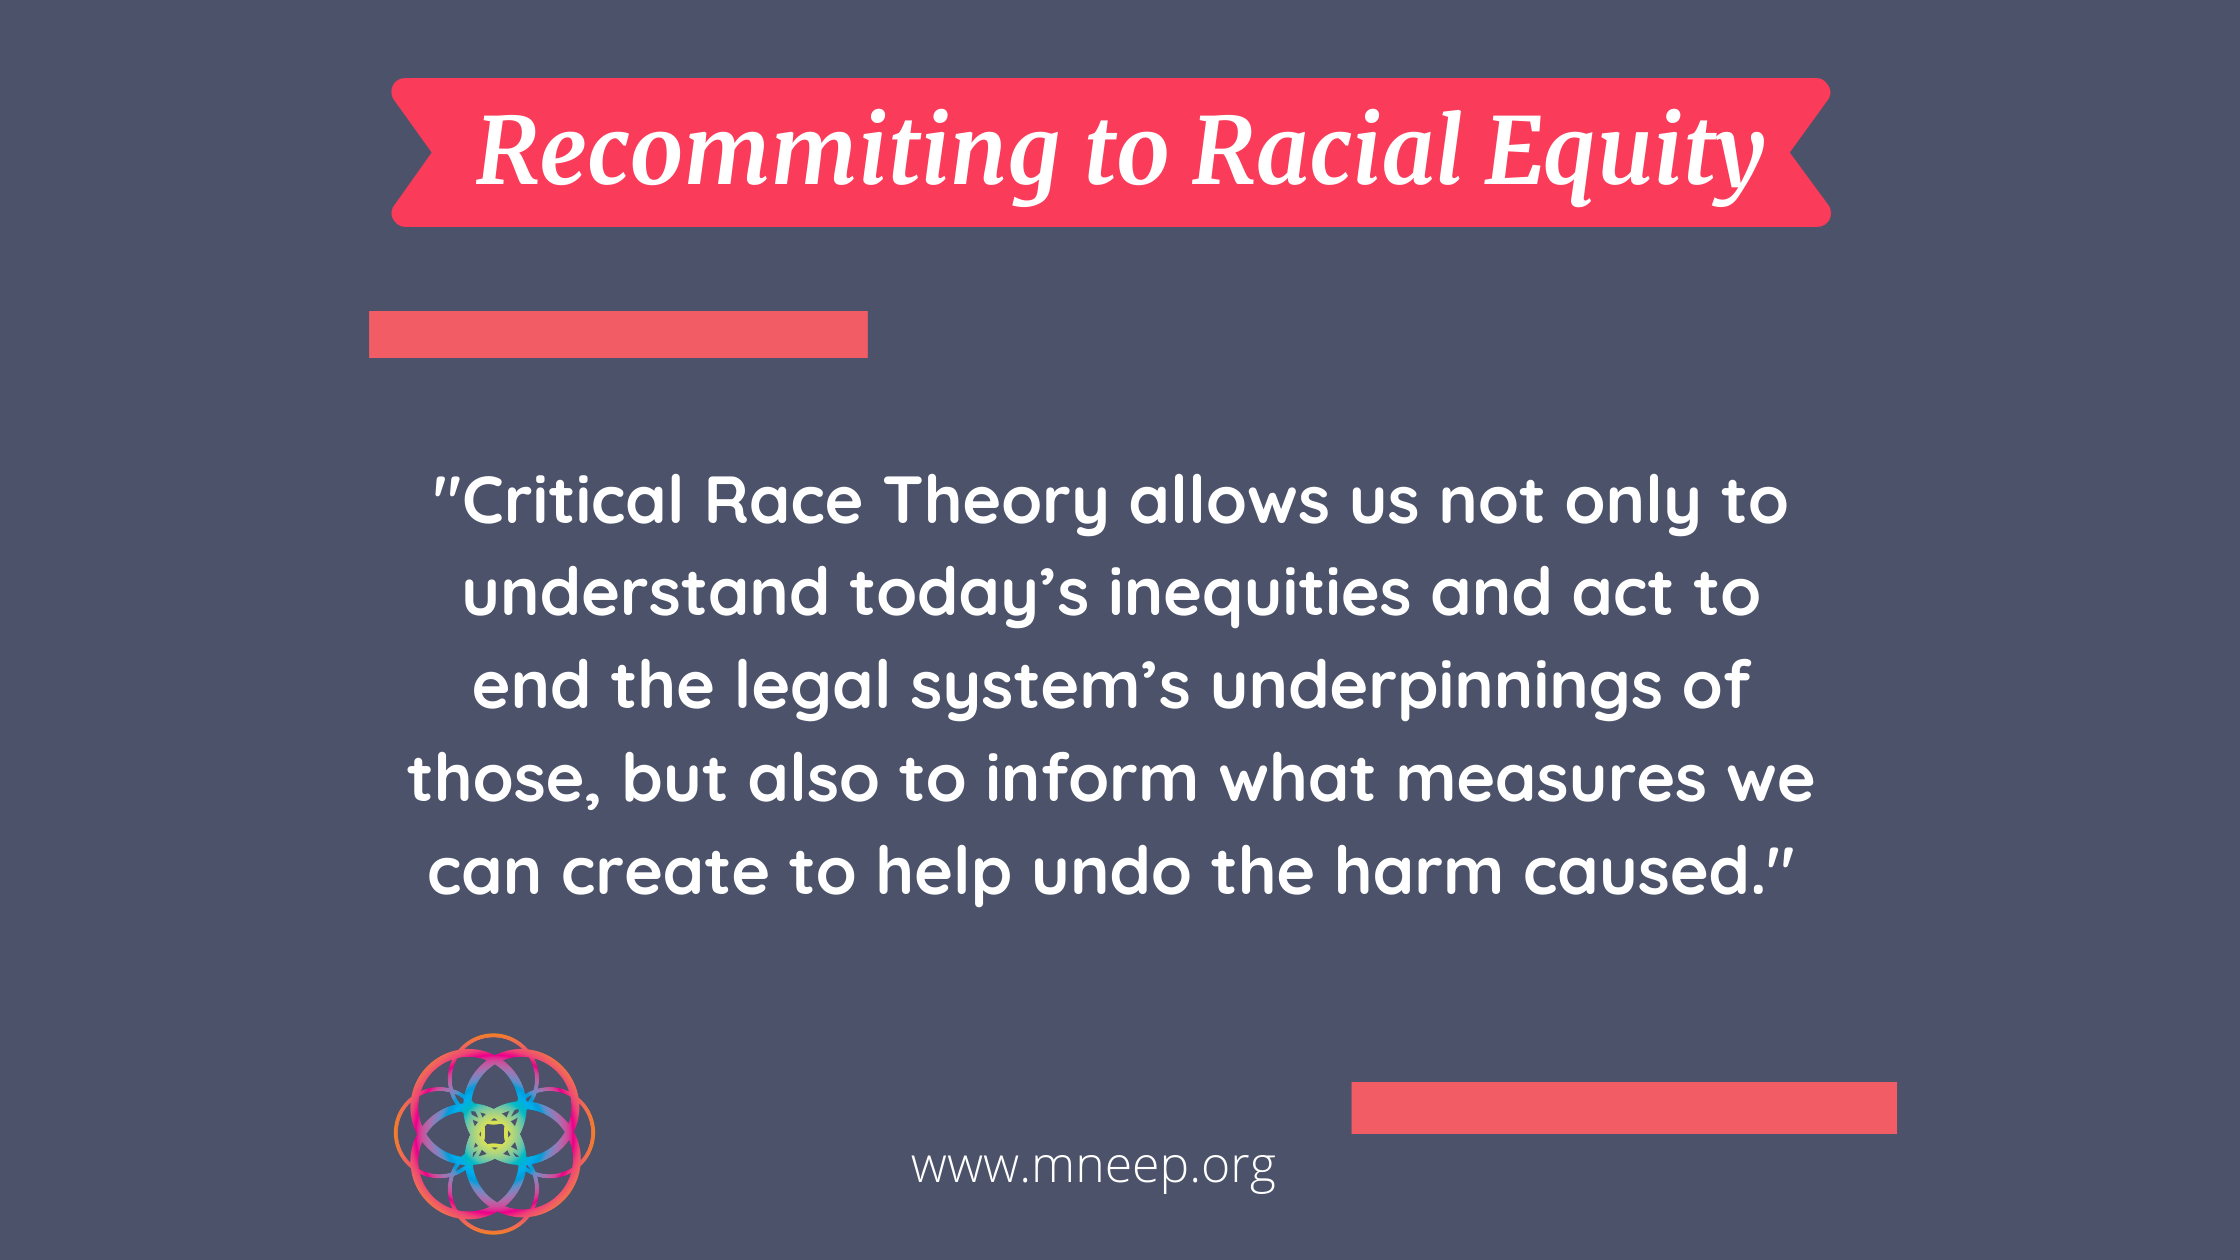 Recommiting to Racial Equity - Critical Race Theory allows us not only to understand today's inequities and act to end the legal system's underpinnings of those, but also to inform what measures we can create to help undo the harm caused.